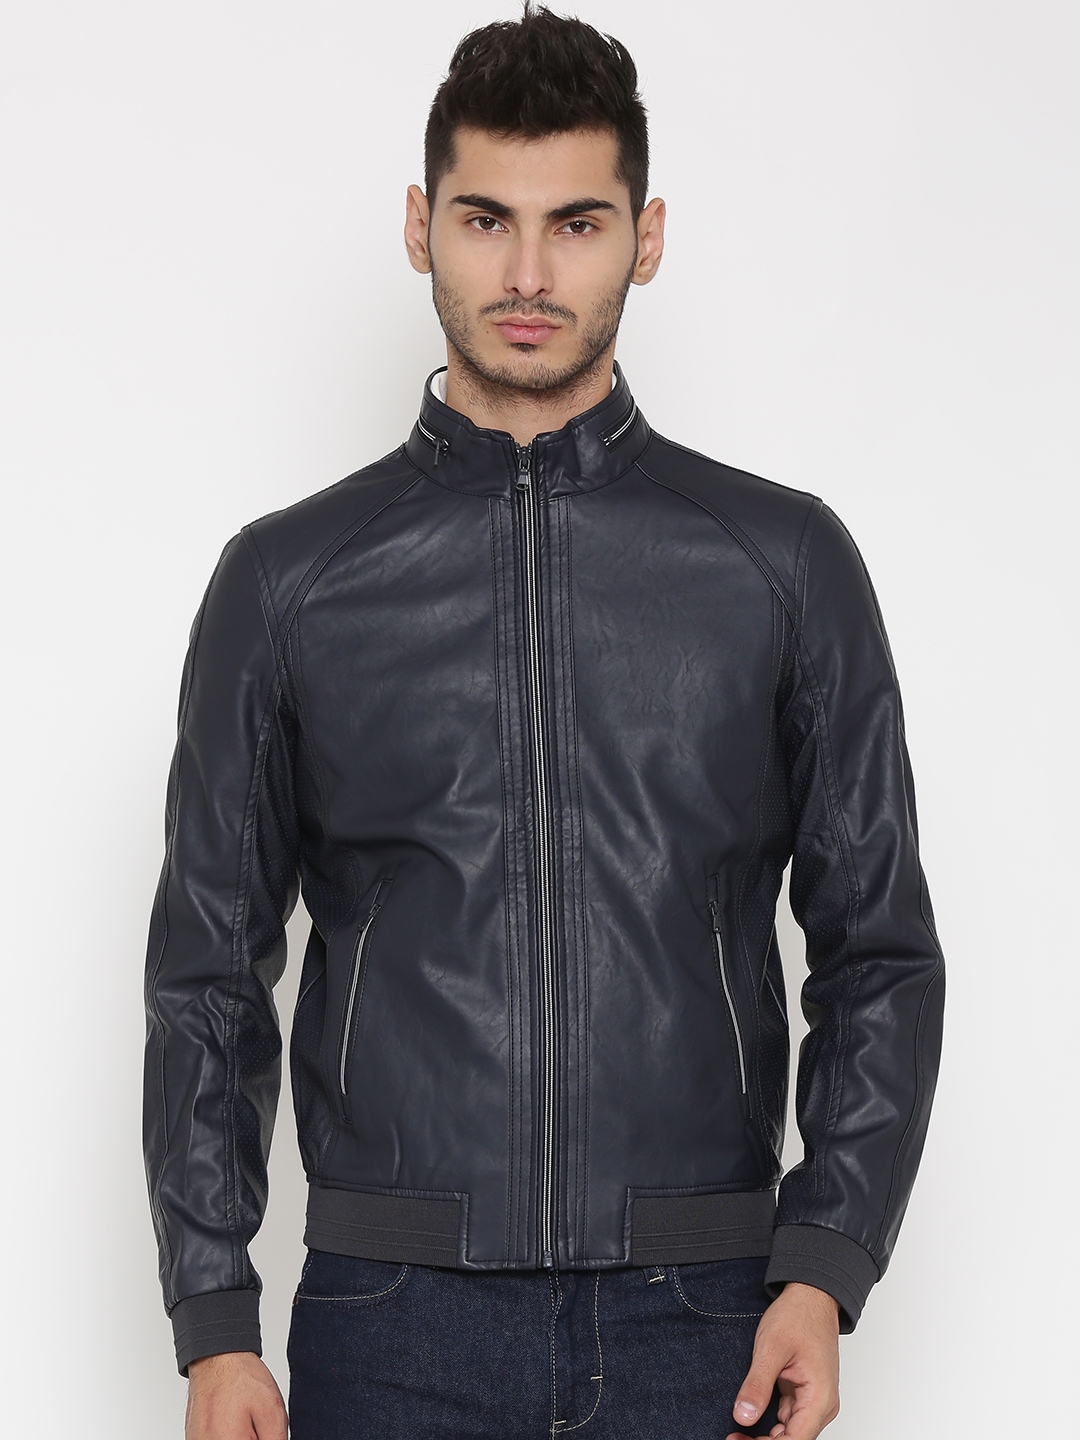 Buy Celio Navy Faux Leather Jacket - Jackets for Men 1509393 | Myntra